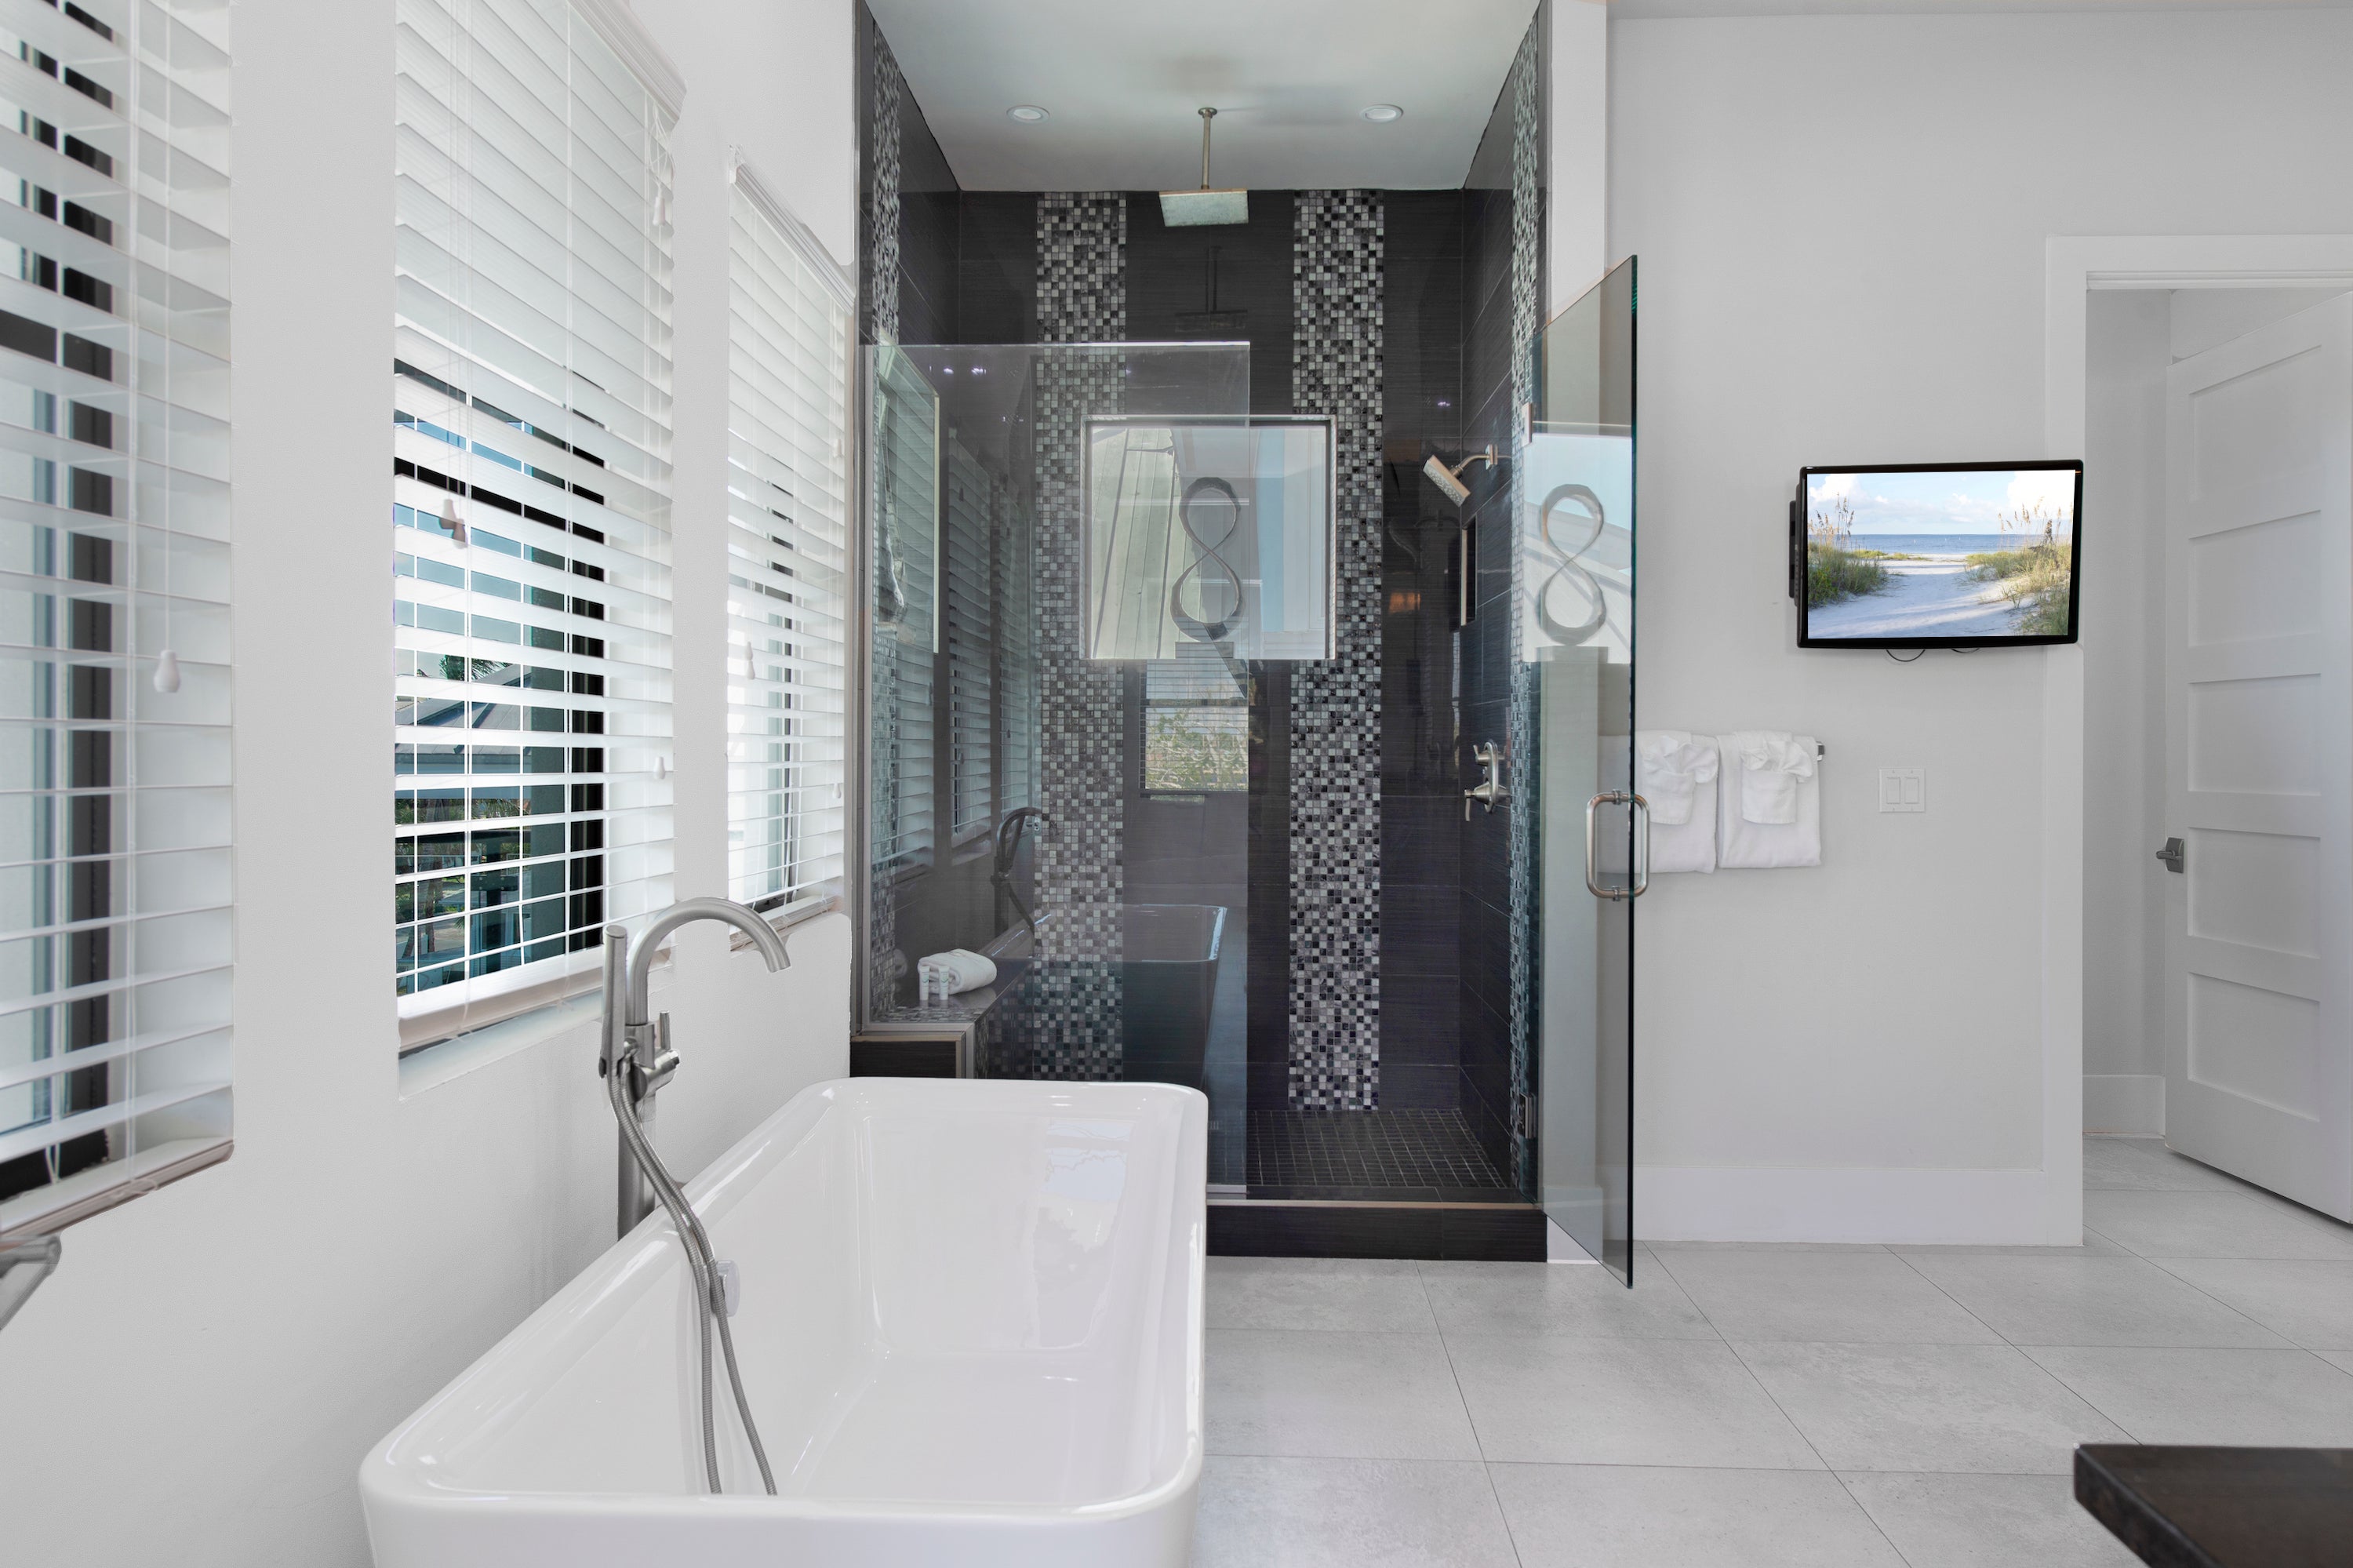 Primary Ensuite Bath with large walk-in shower*